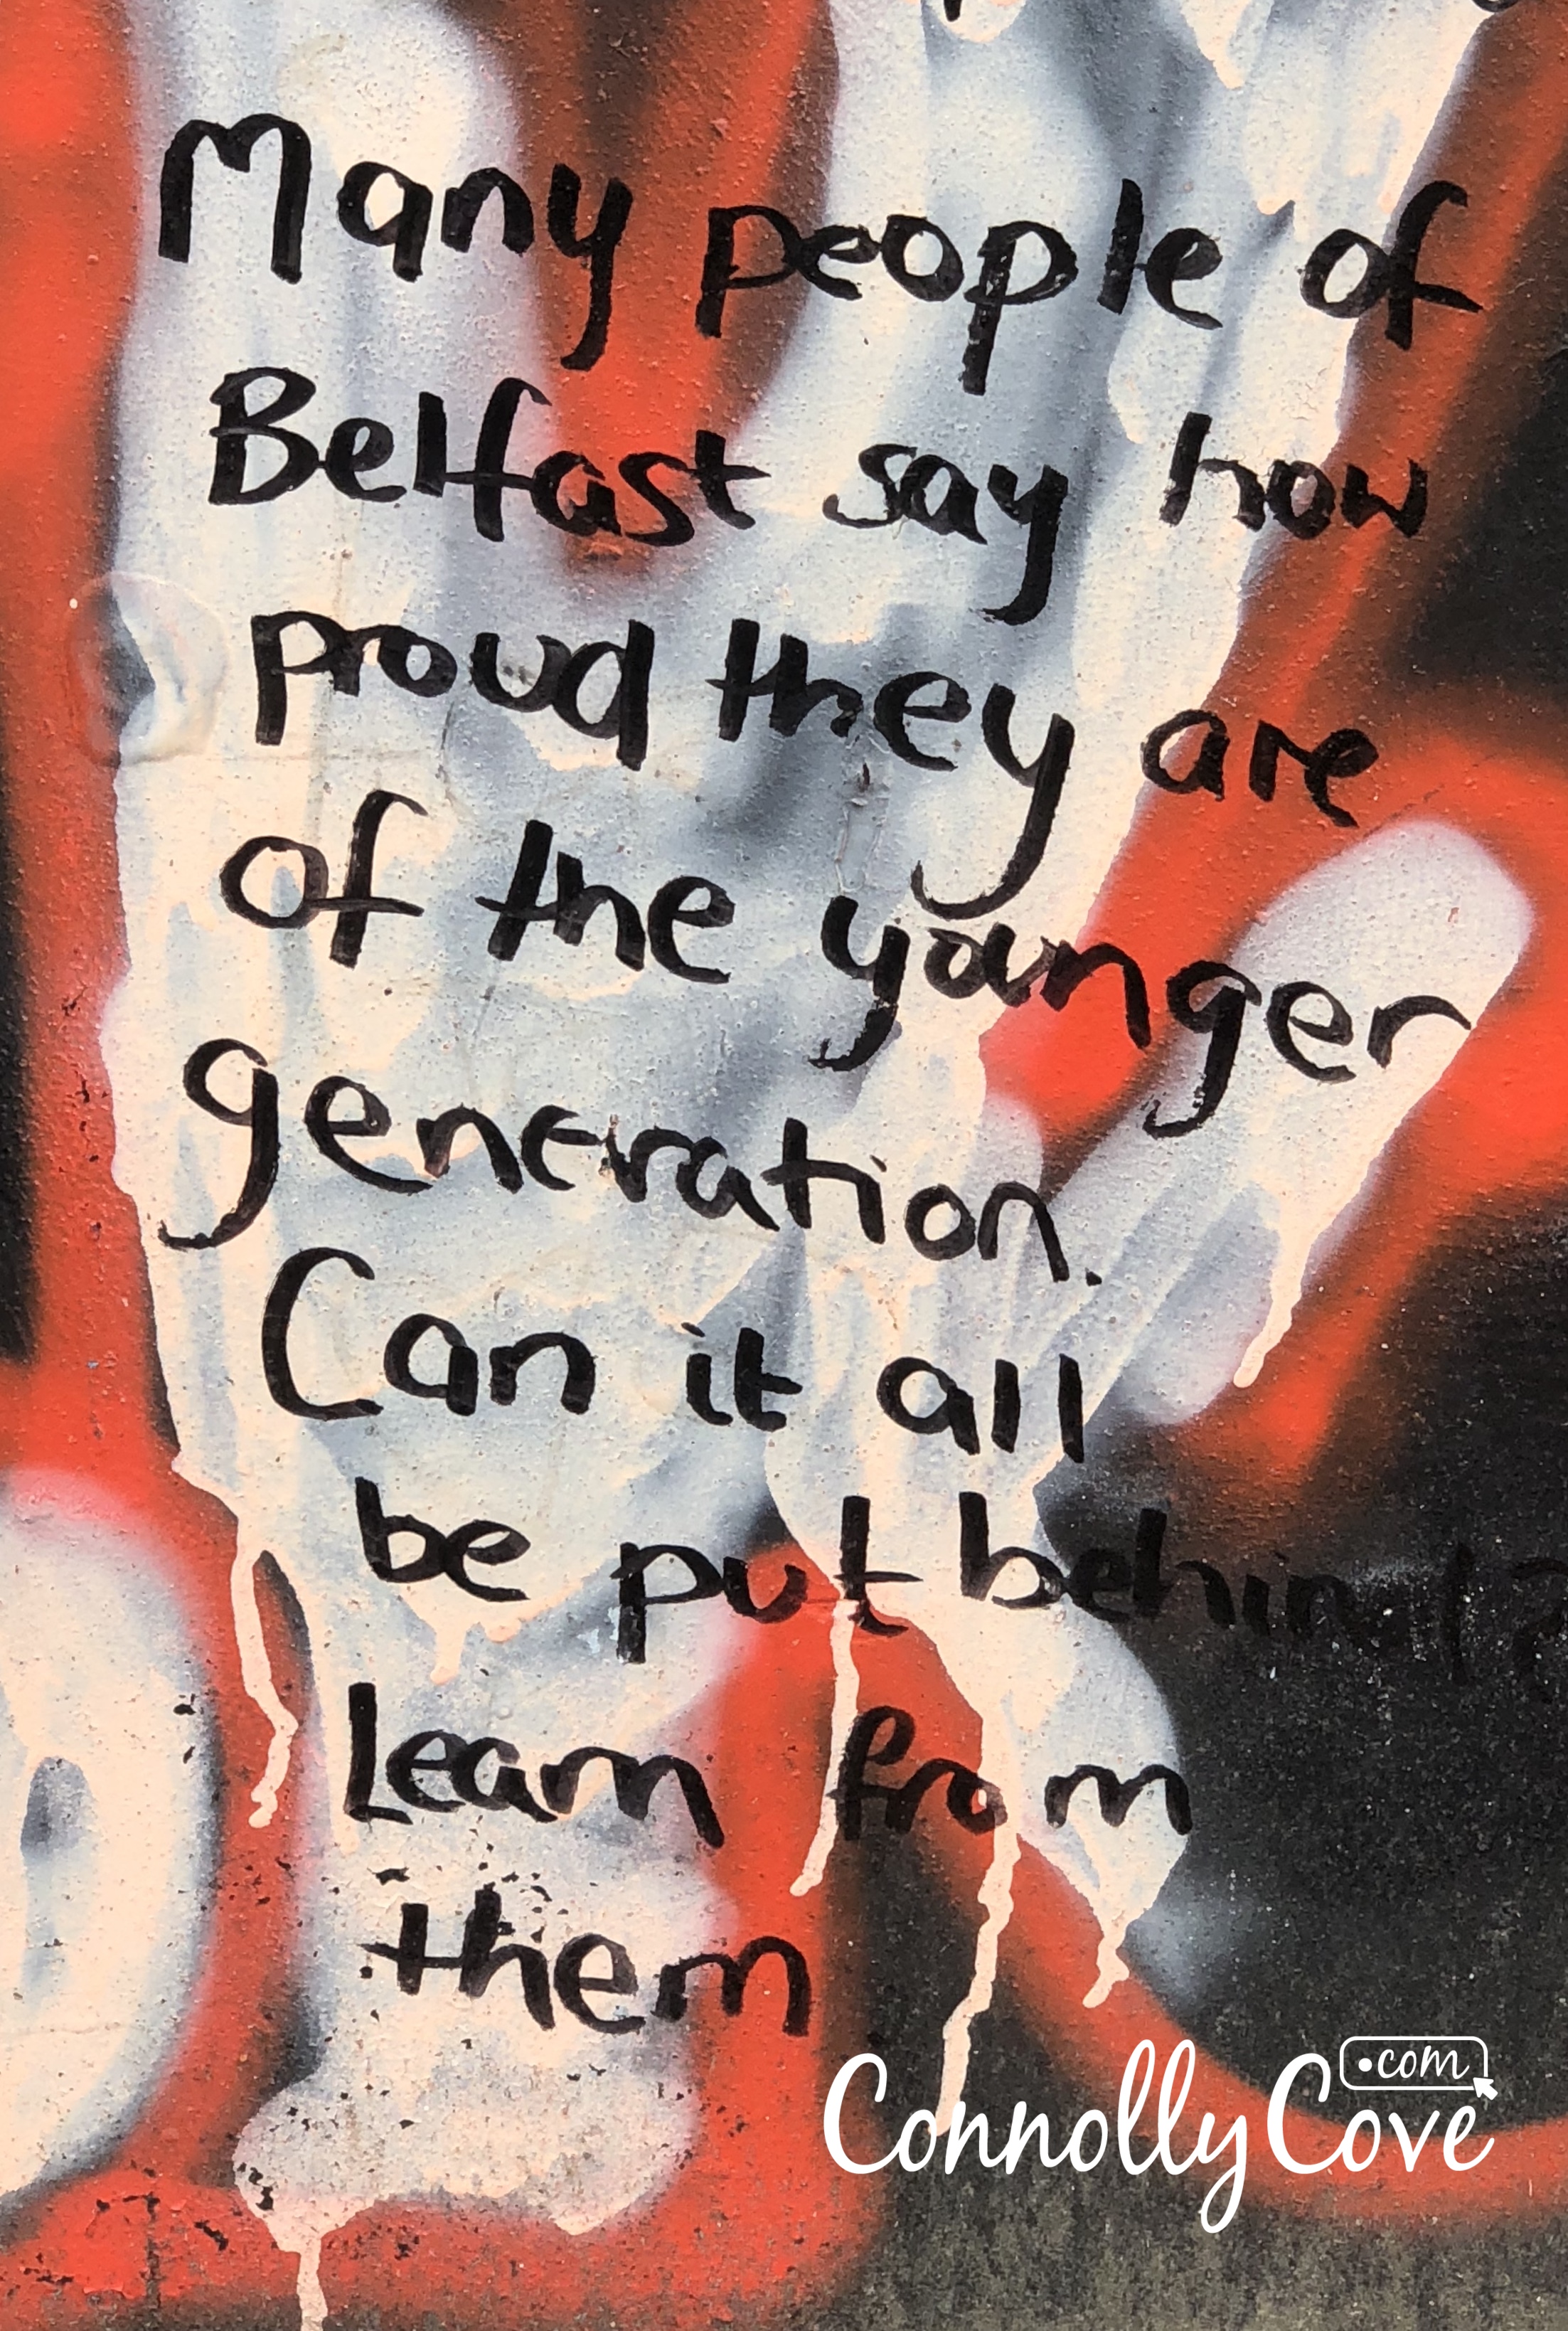 Peace Wall Belfast Messages